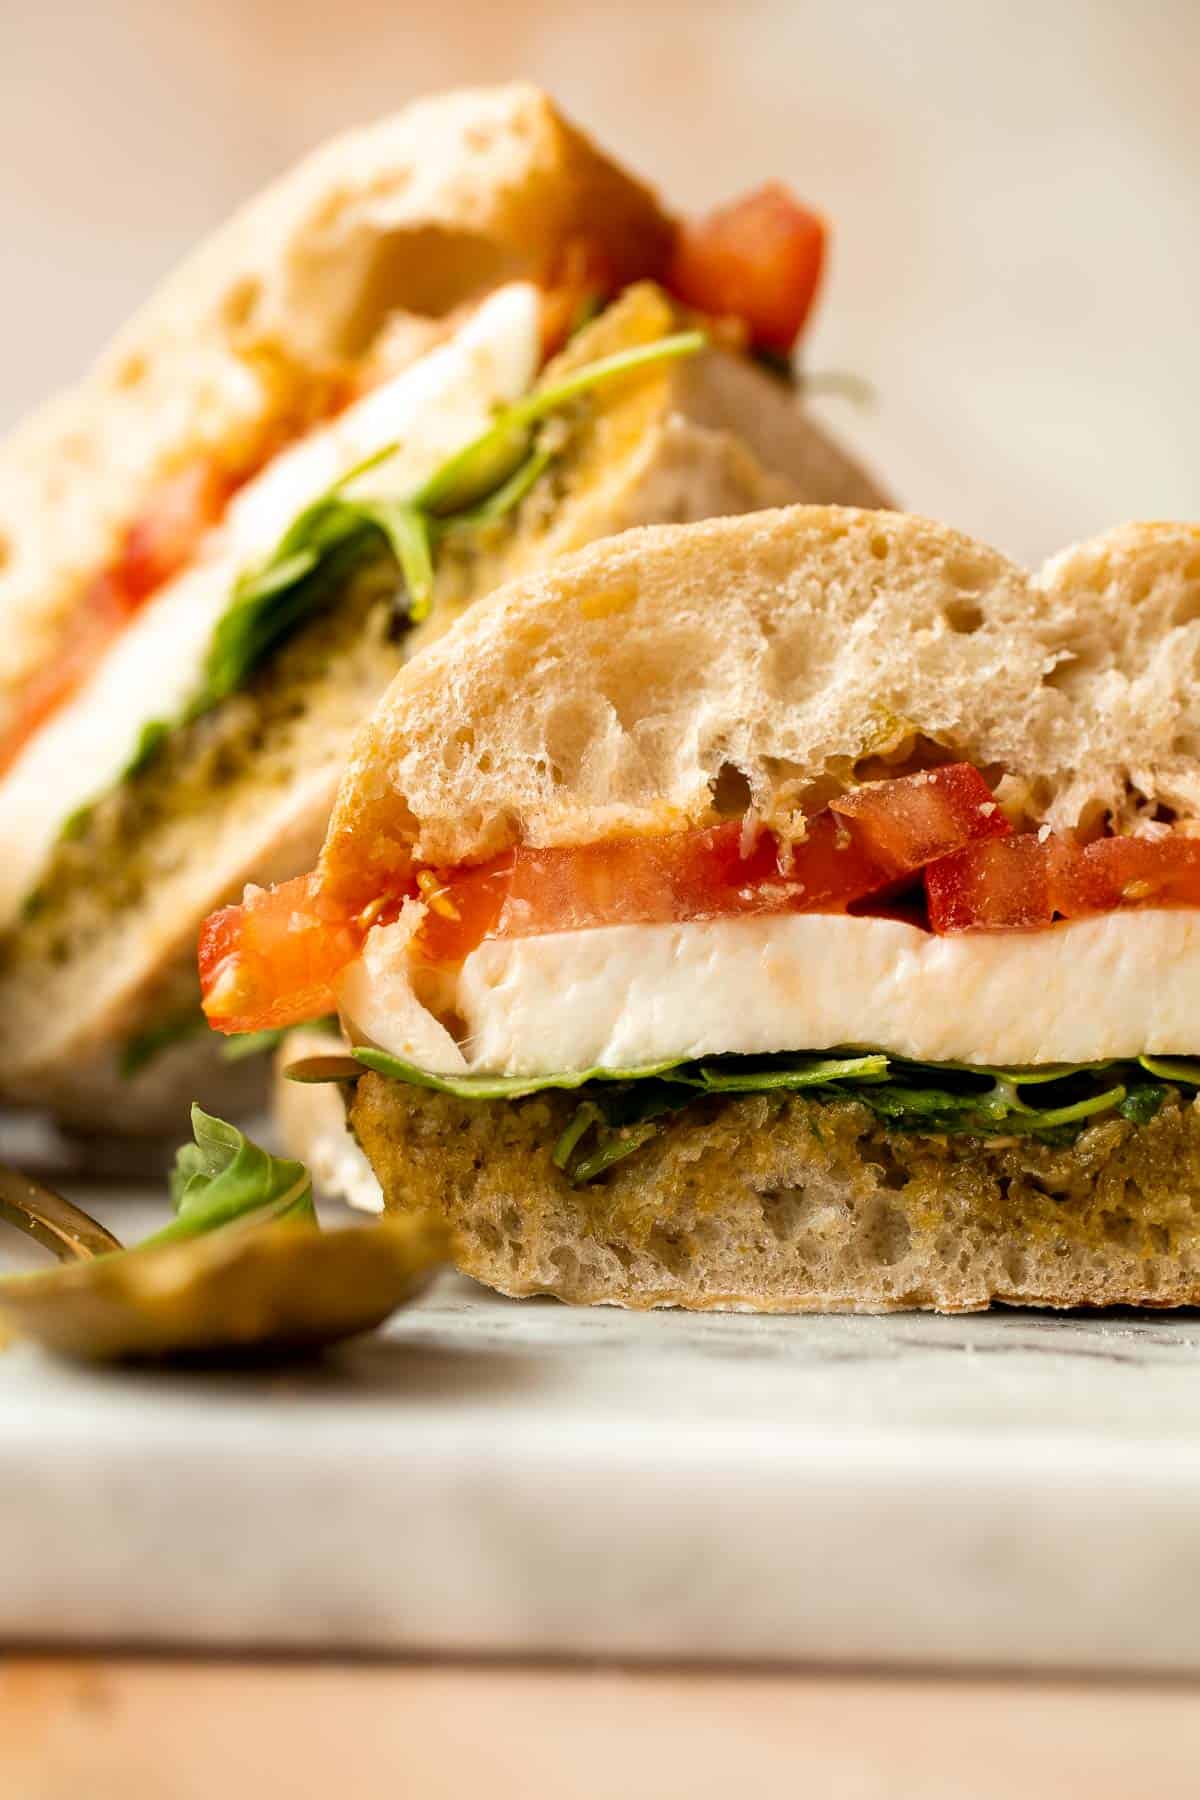 This vegetarian Caprese Sandwich is packed with layers of fresh tomatoes, mozzarella, greens, and a balsamic basil pesto sauce in between ciabatta buns. | aheadofthyme.com